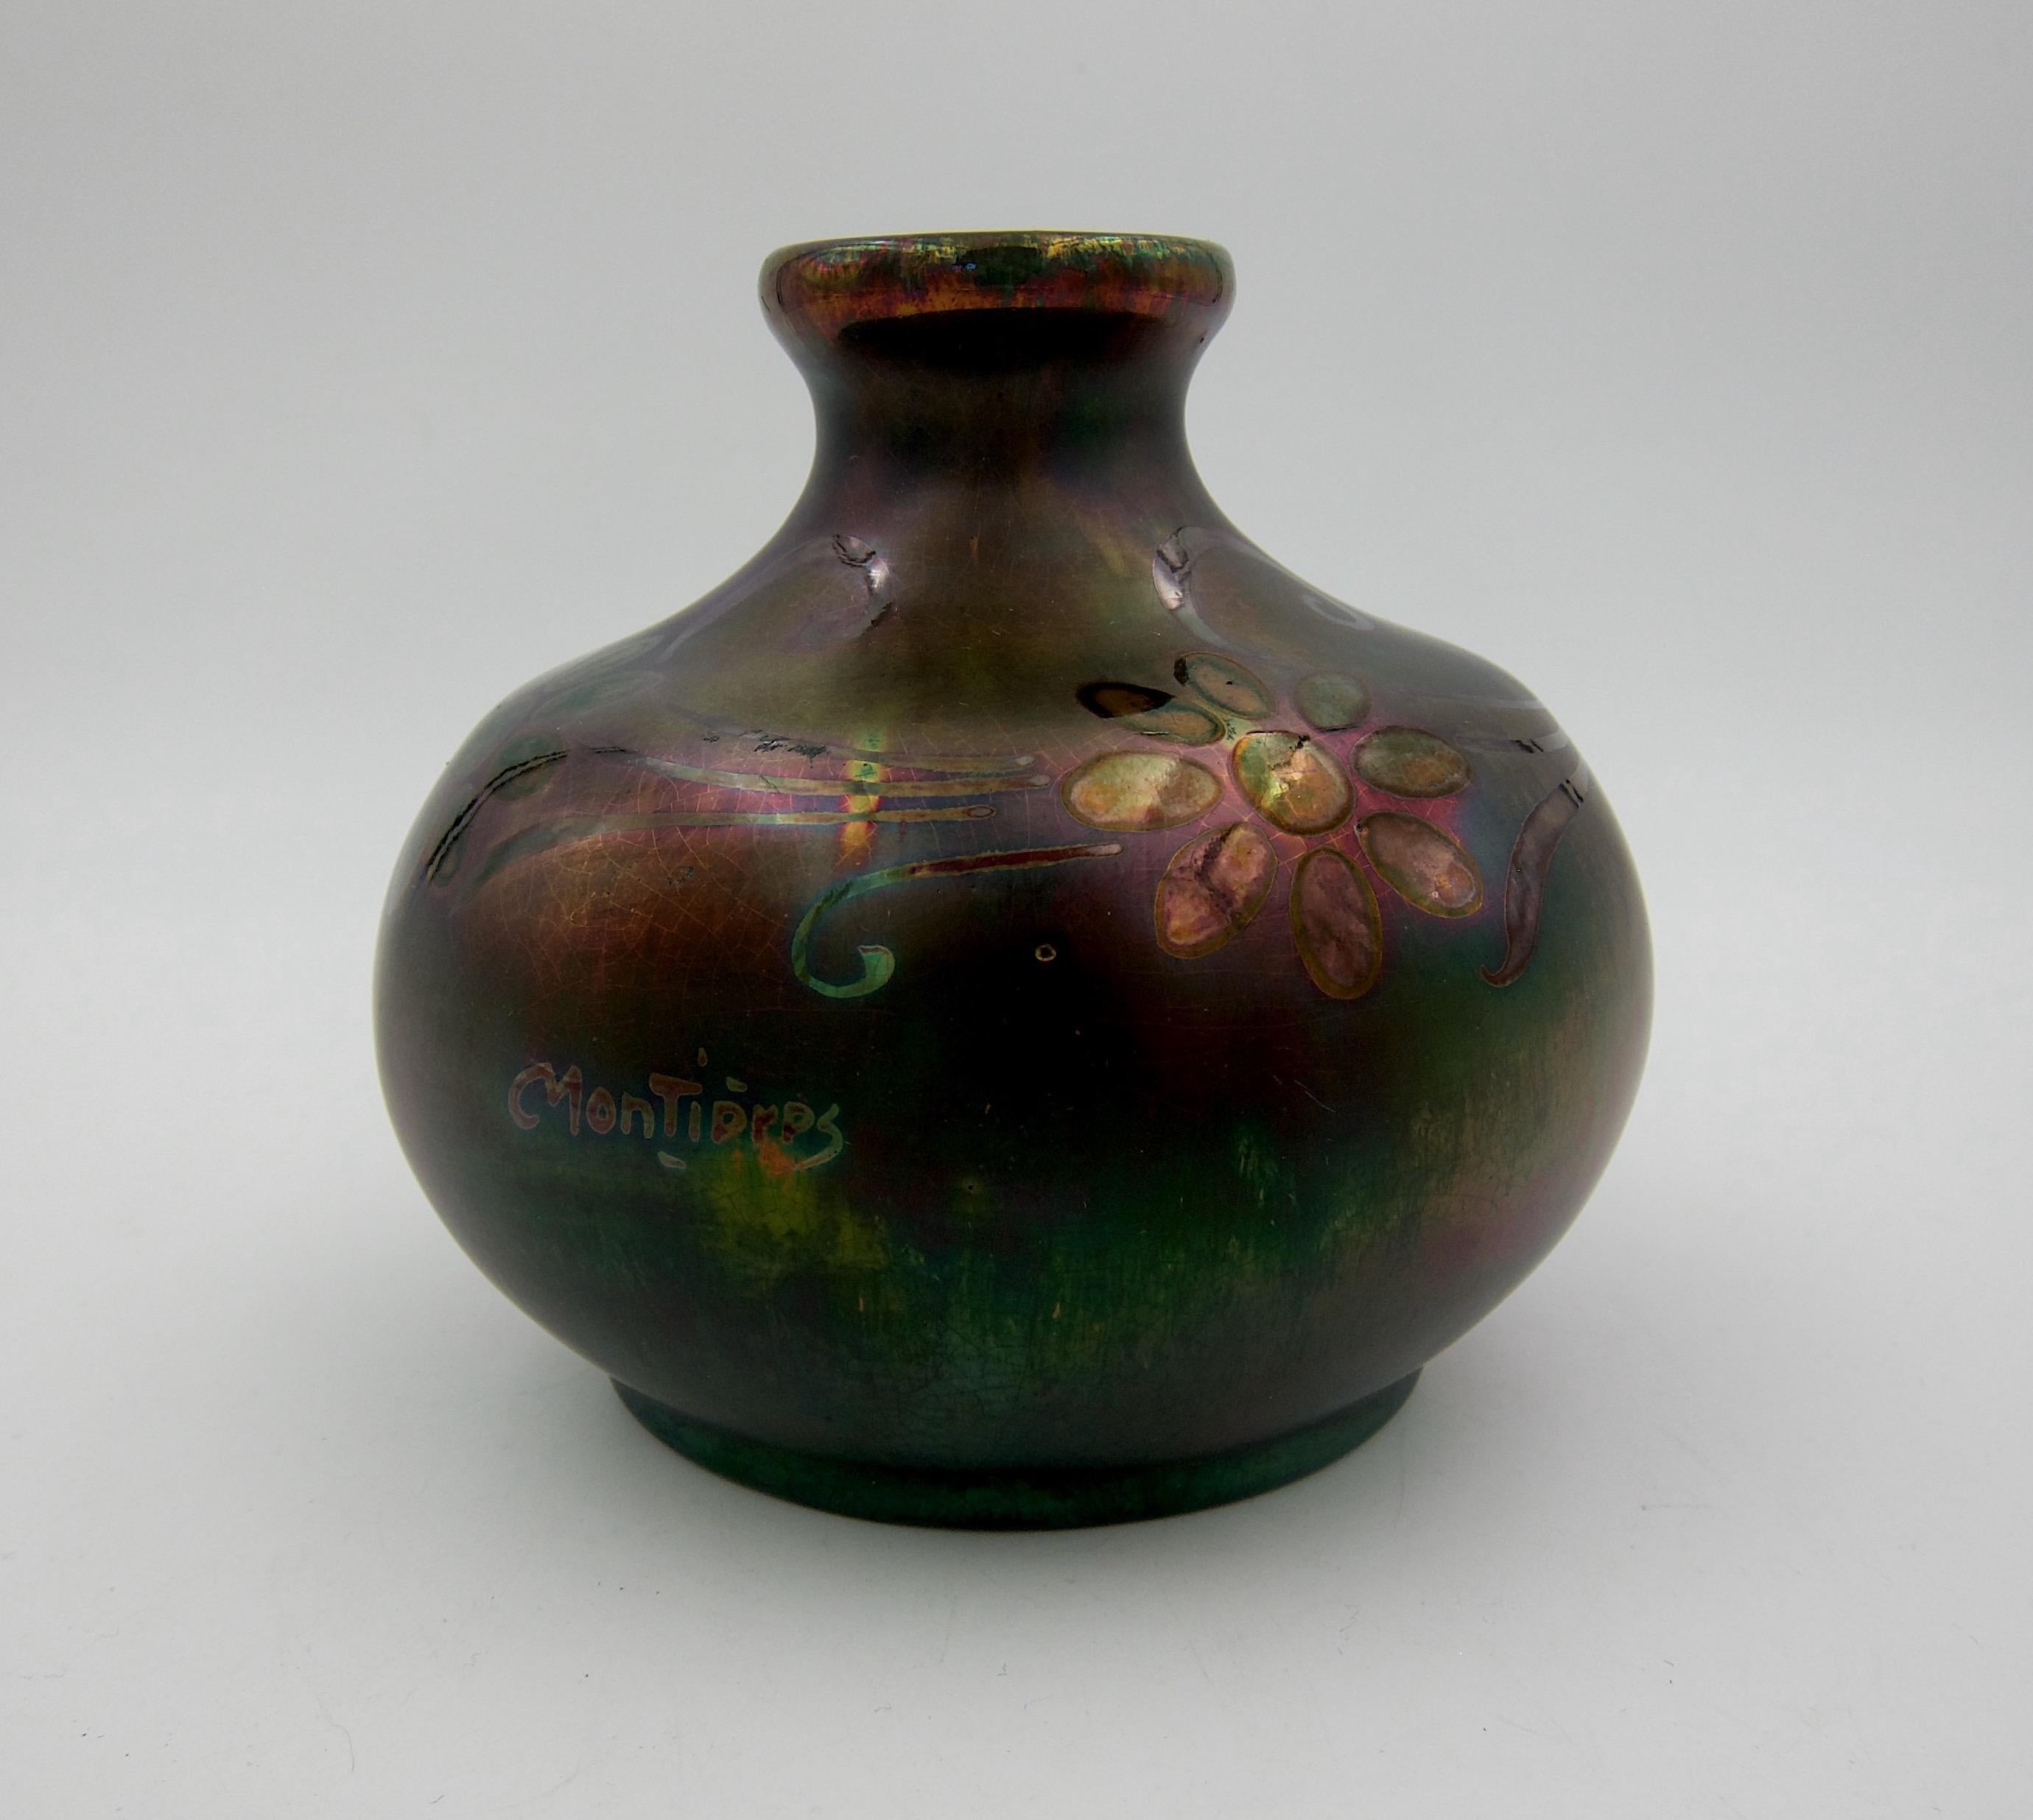 A signed French art pottery vase with a metallic luster glaze from the Montières workshop, dating circa 1920s. The French faience Art Nouveau vase is decorated with an overall green, purple, and dark maroon iridescent glaze. Hand-painted flowers and